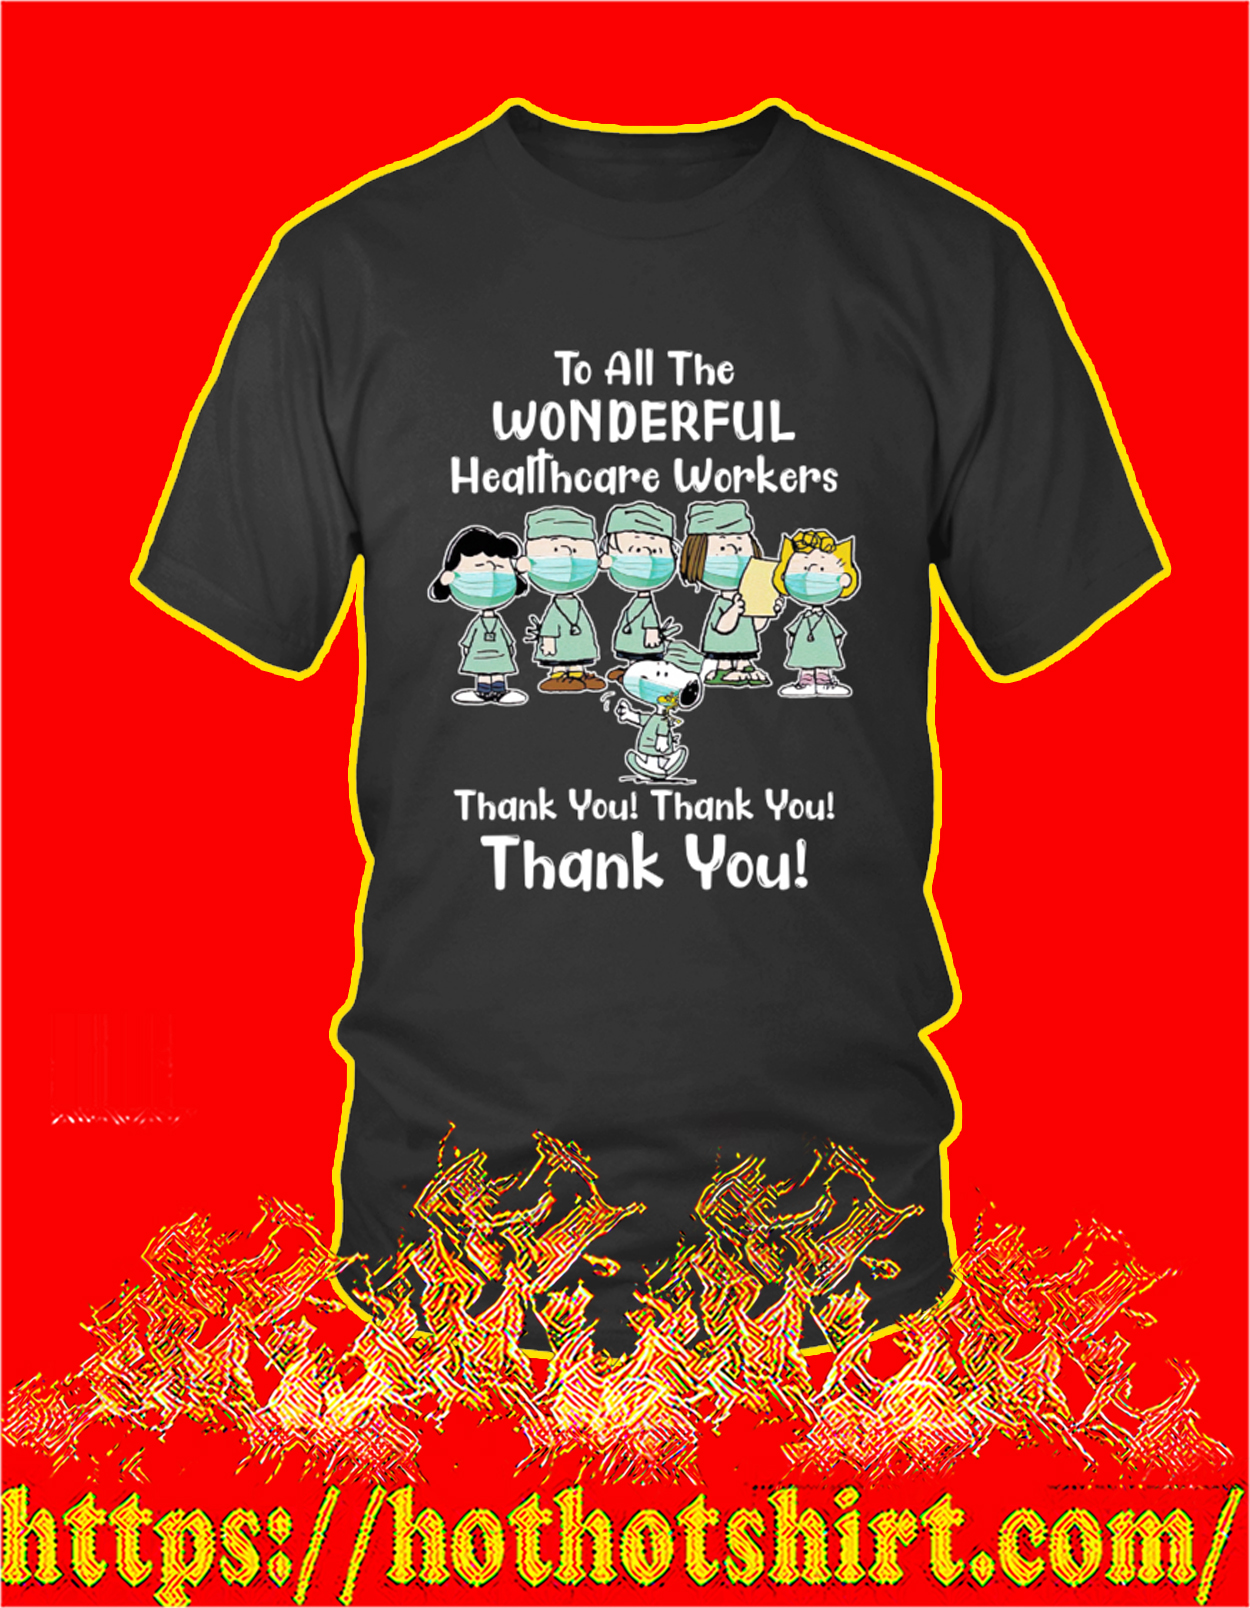 Peanuts snoopy to all the wonderful healthcare workers thank you shirt, sweatshirt and tank top